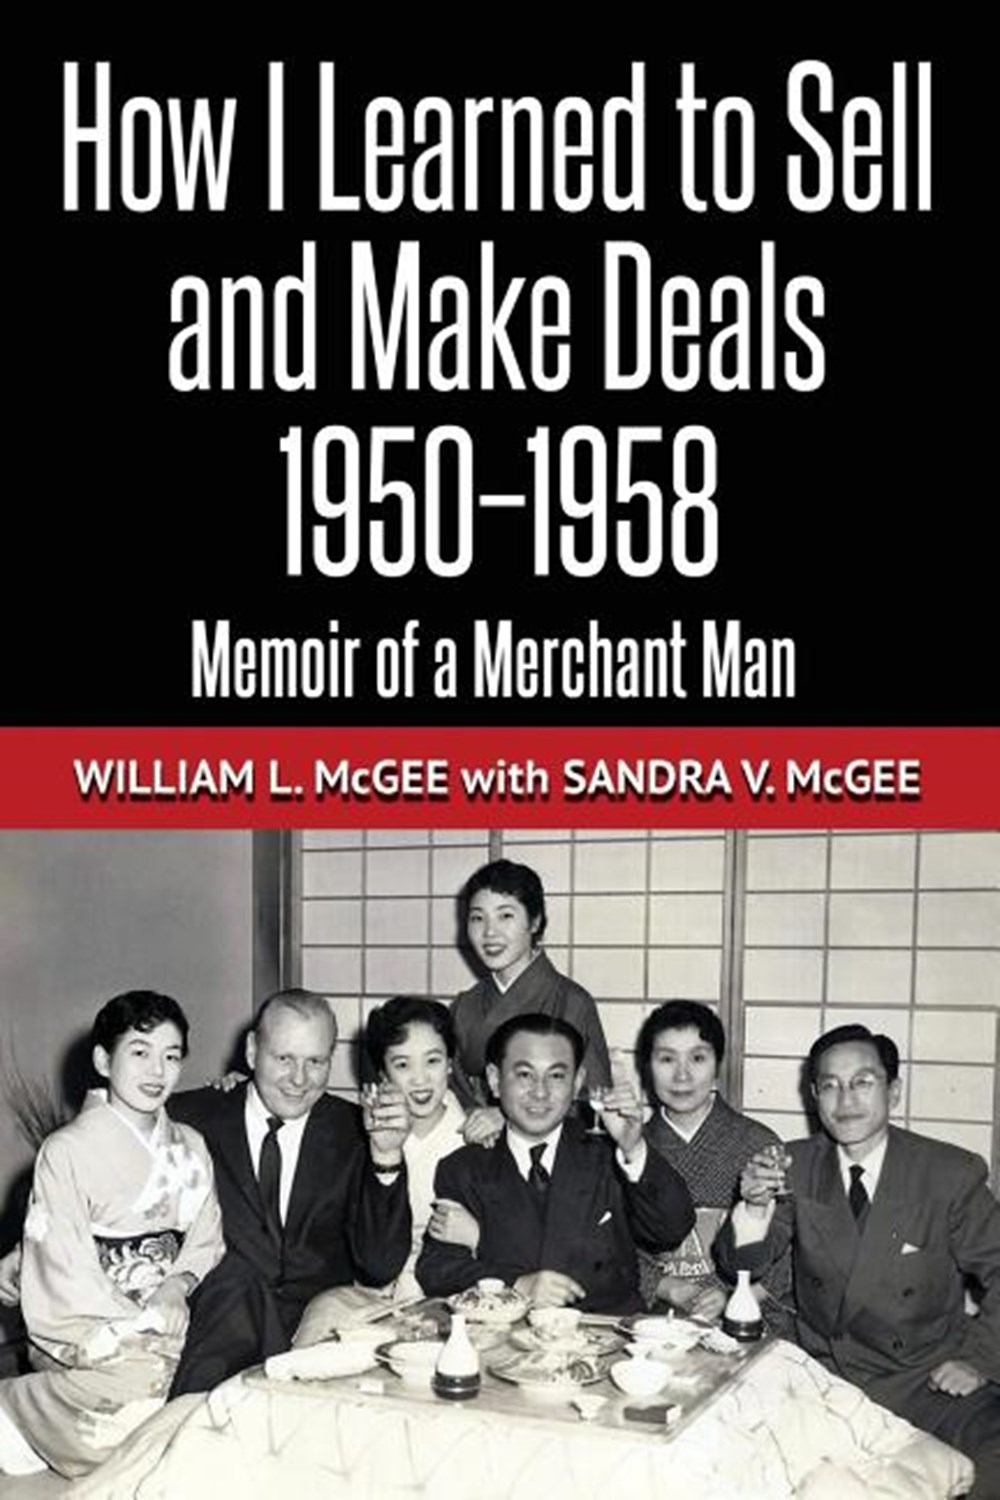 How I Learned To Sell and Make Deals, 1950-1958 Memoir of a Merchant Man